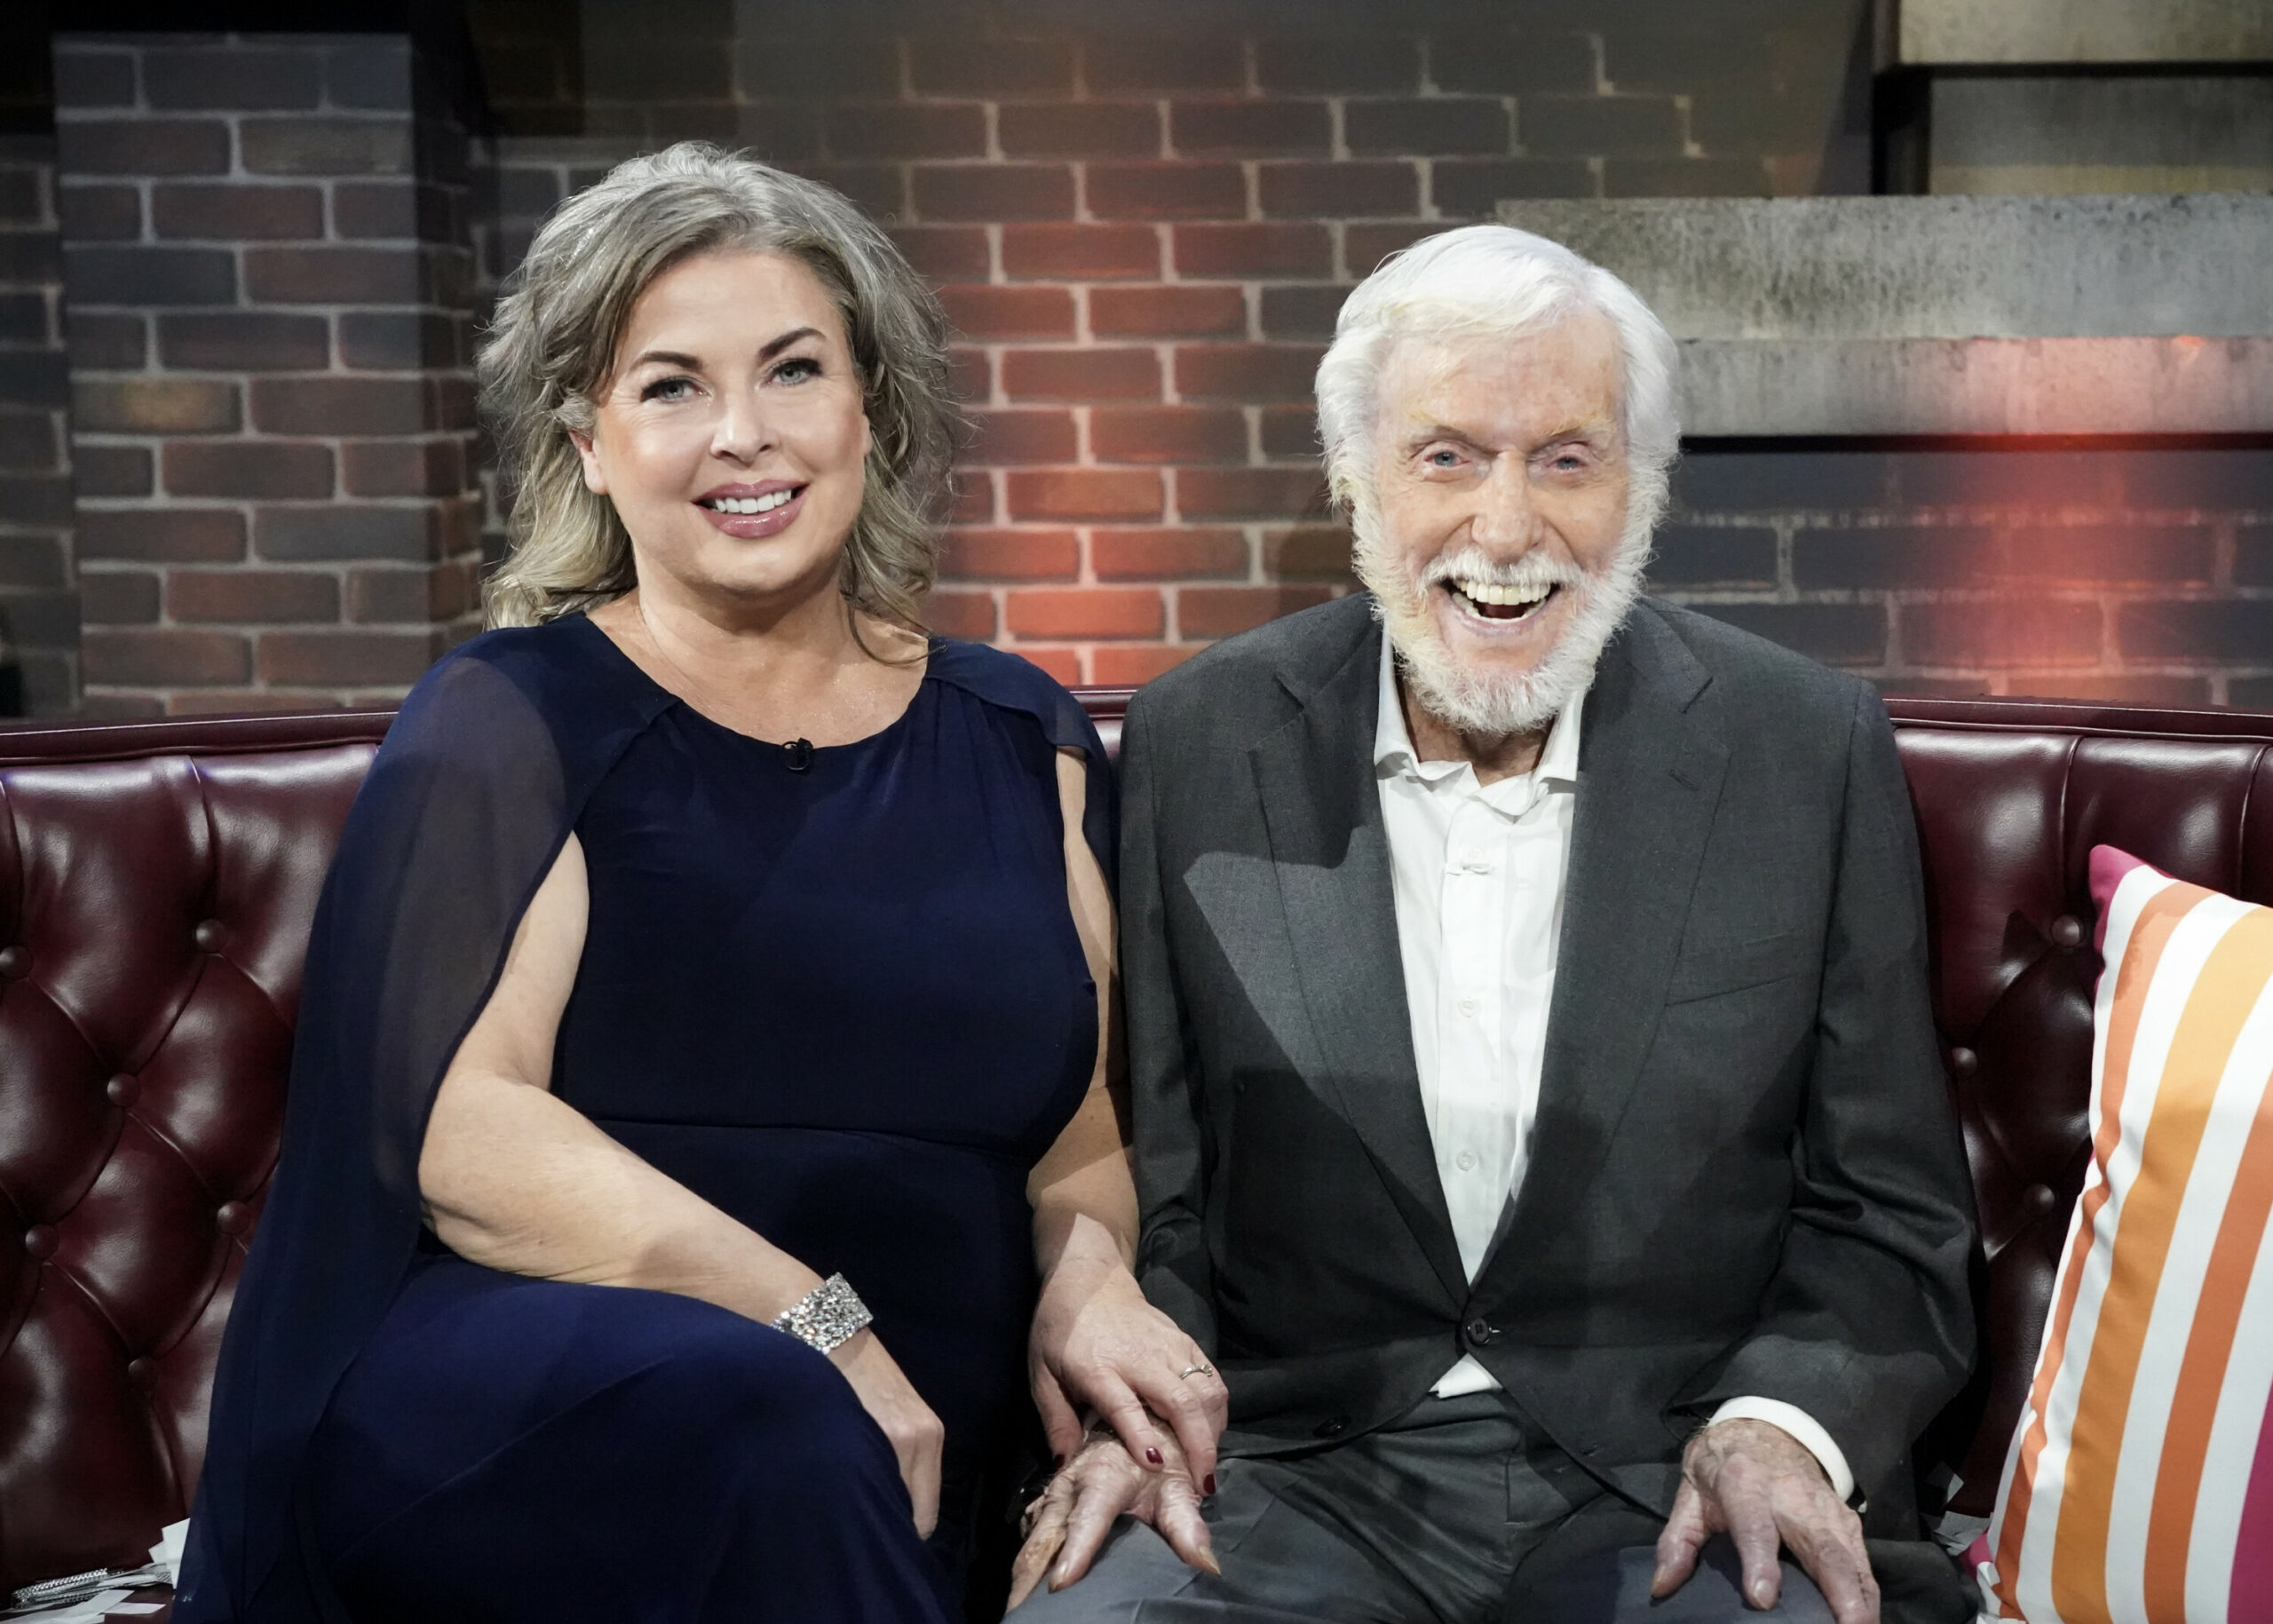 Arlene Silver and Dick Van Dyke at the CBS Original Special DICK VAN DYKE: 98 YEARS OF MAGIC, scheduled to air on the CBS Television Network.